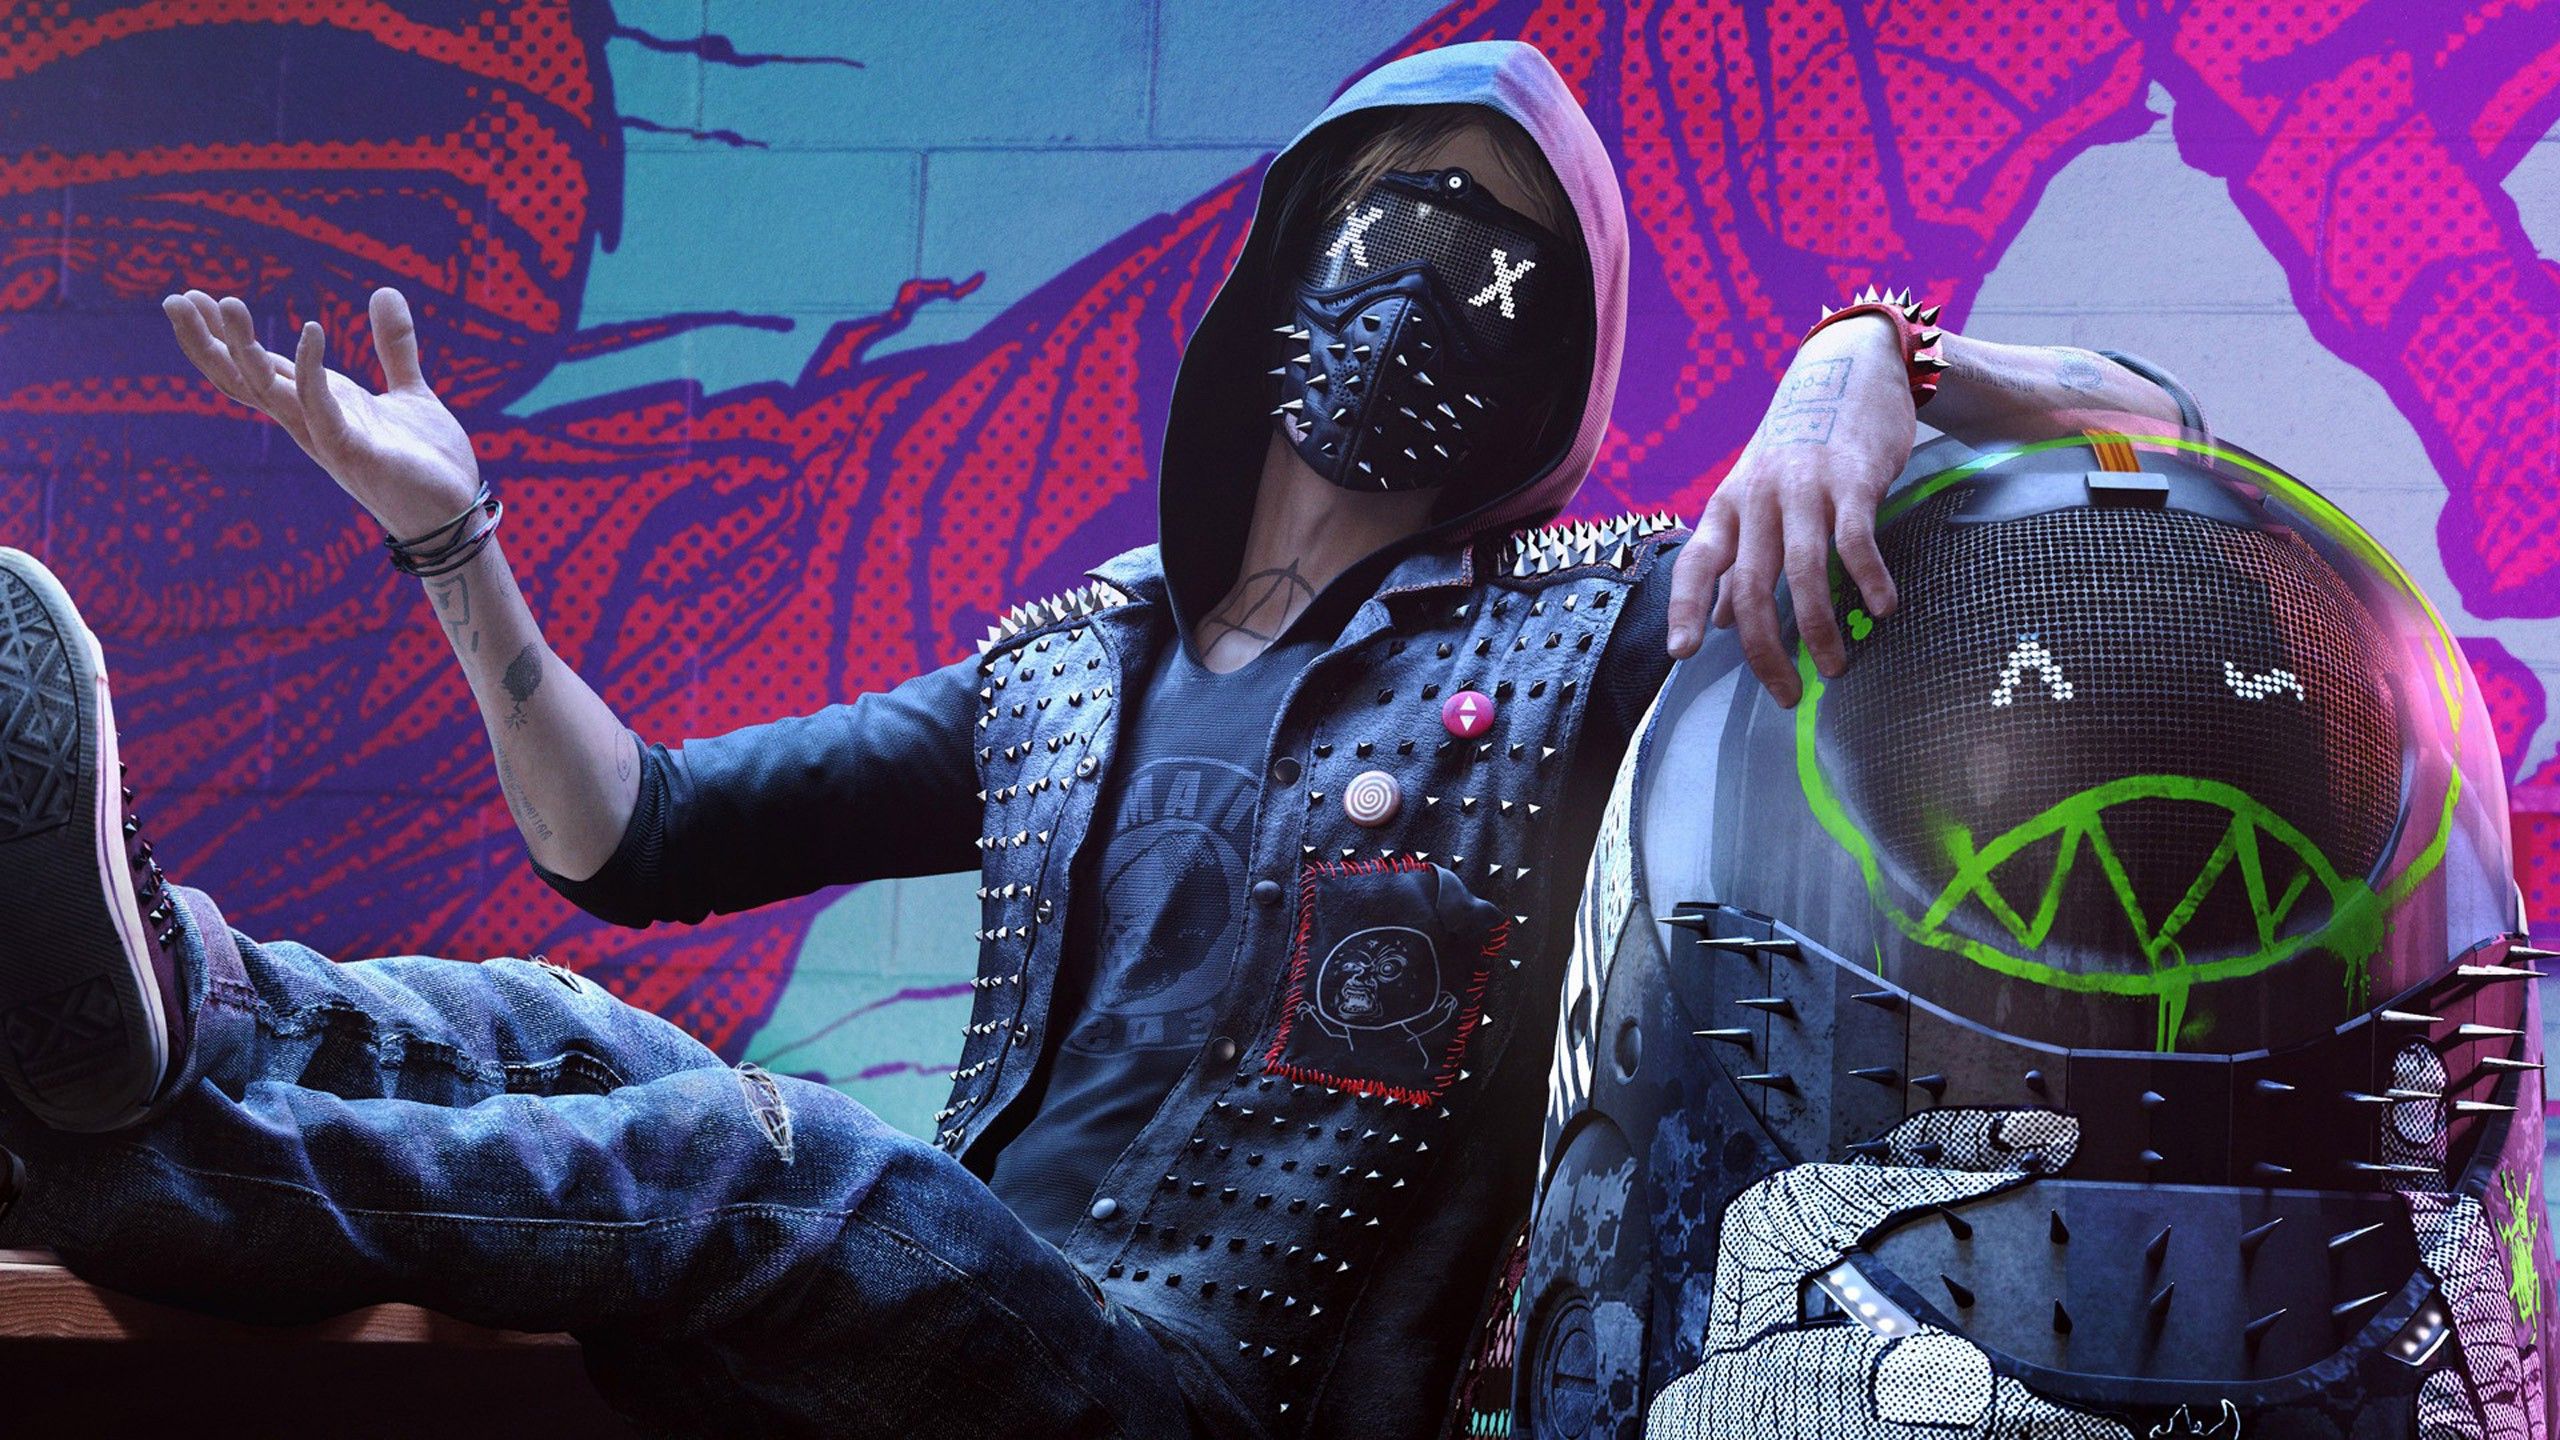 Free download Wrench Watch Dogs 2 Game New HD Wallpaper [2560x1440] for your Desktop, Mobile & Tablet. Explore Watch Dogs 2 Video Game Wallpaper. Watch Dogs 2 Video Game